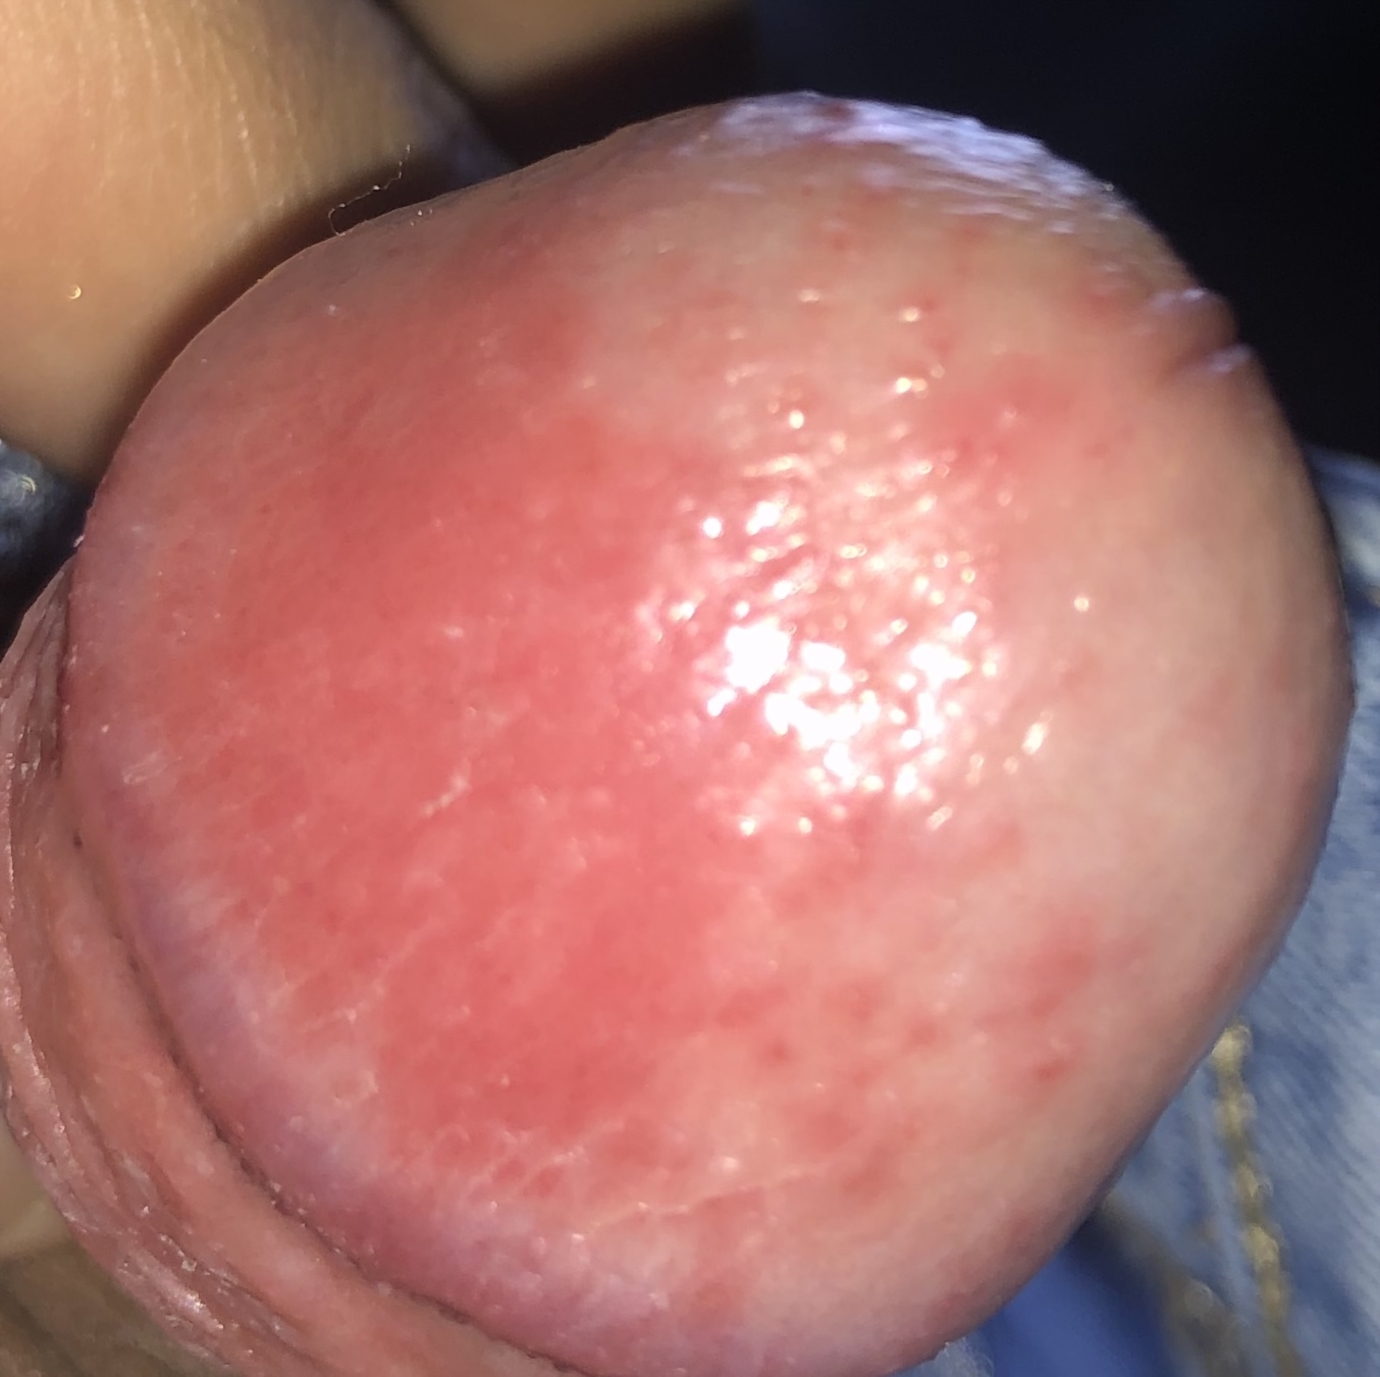 On red penis dots Red spots